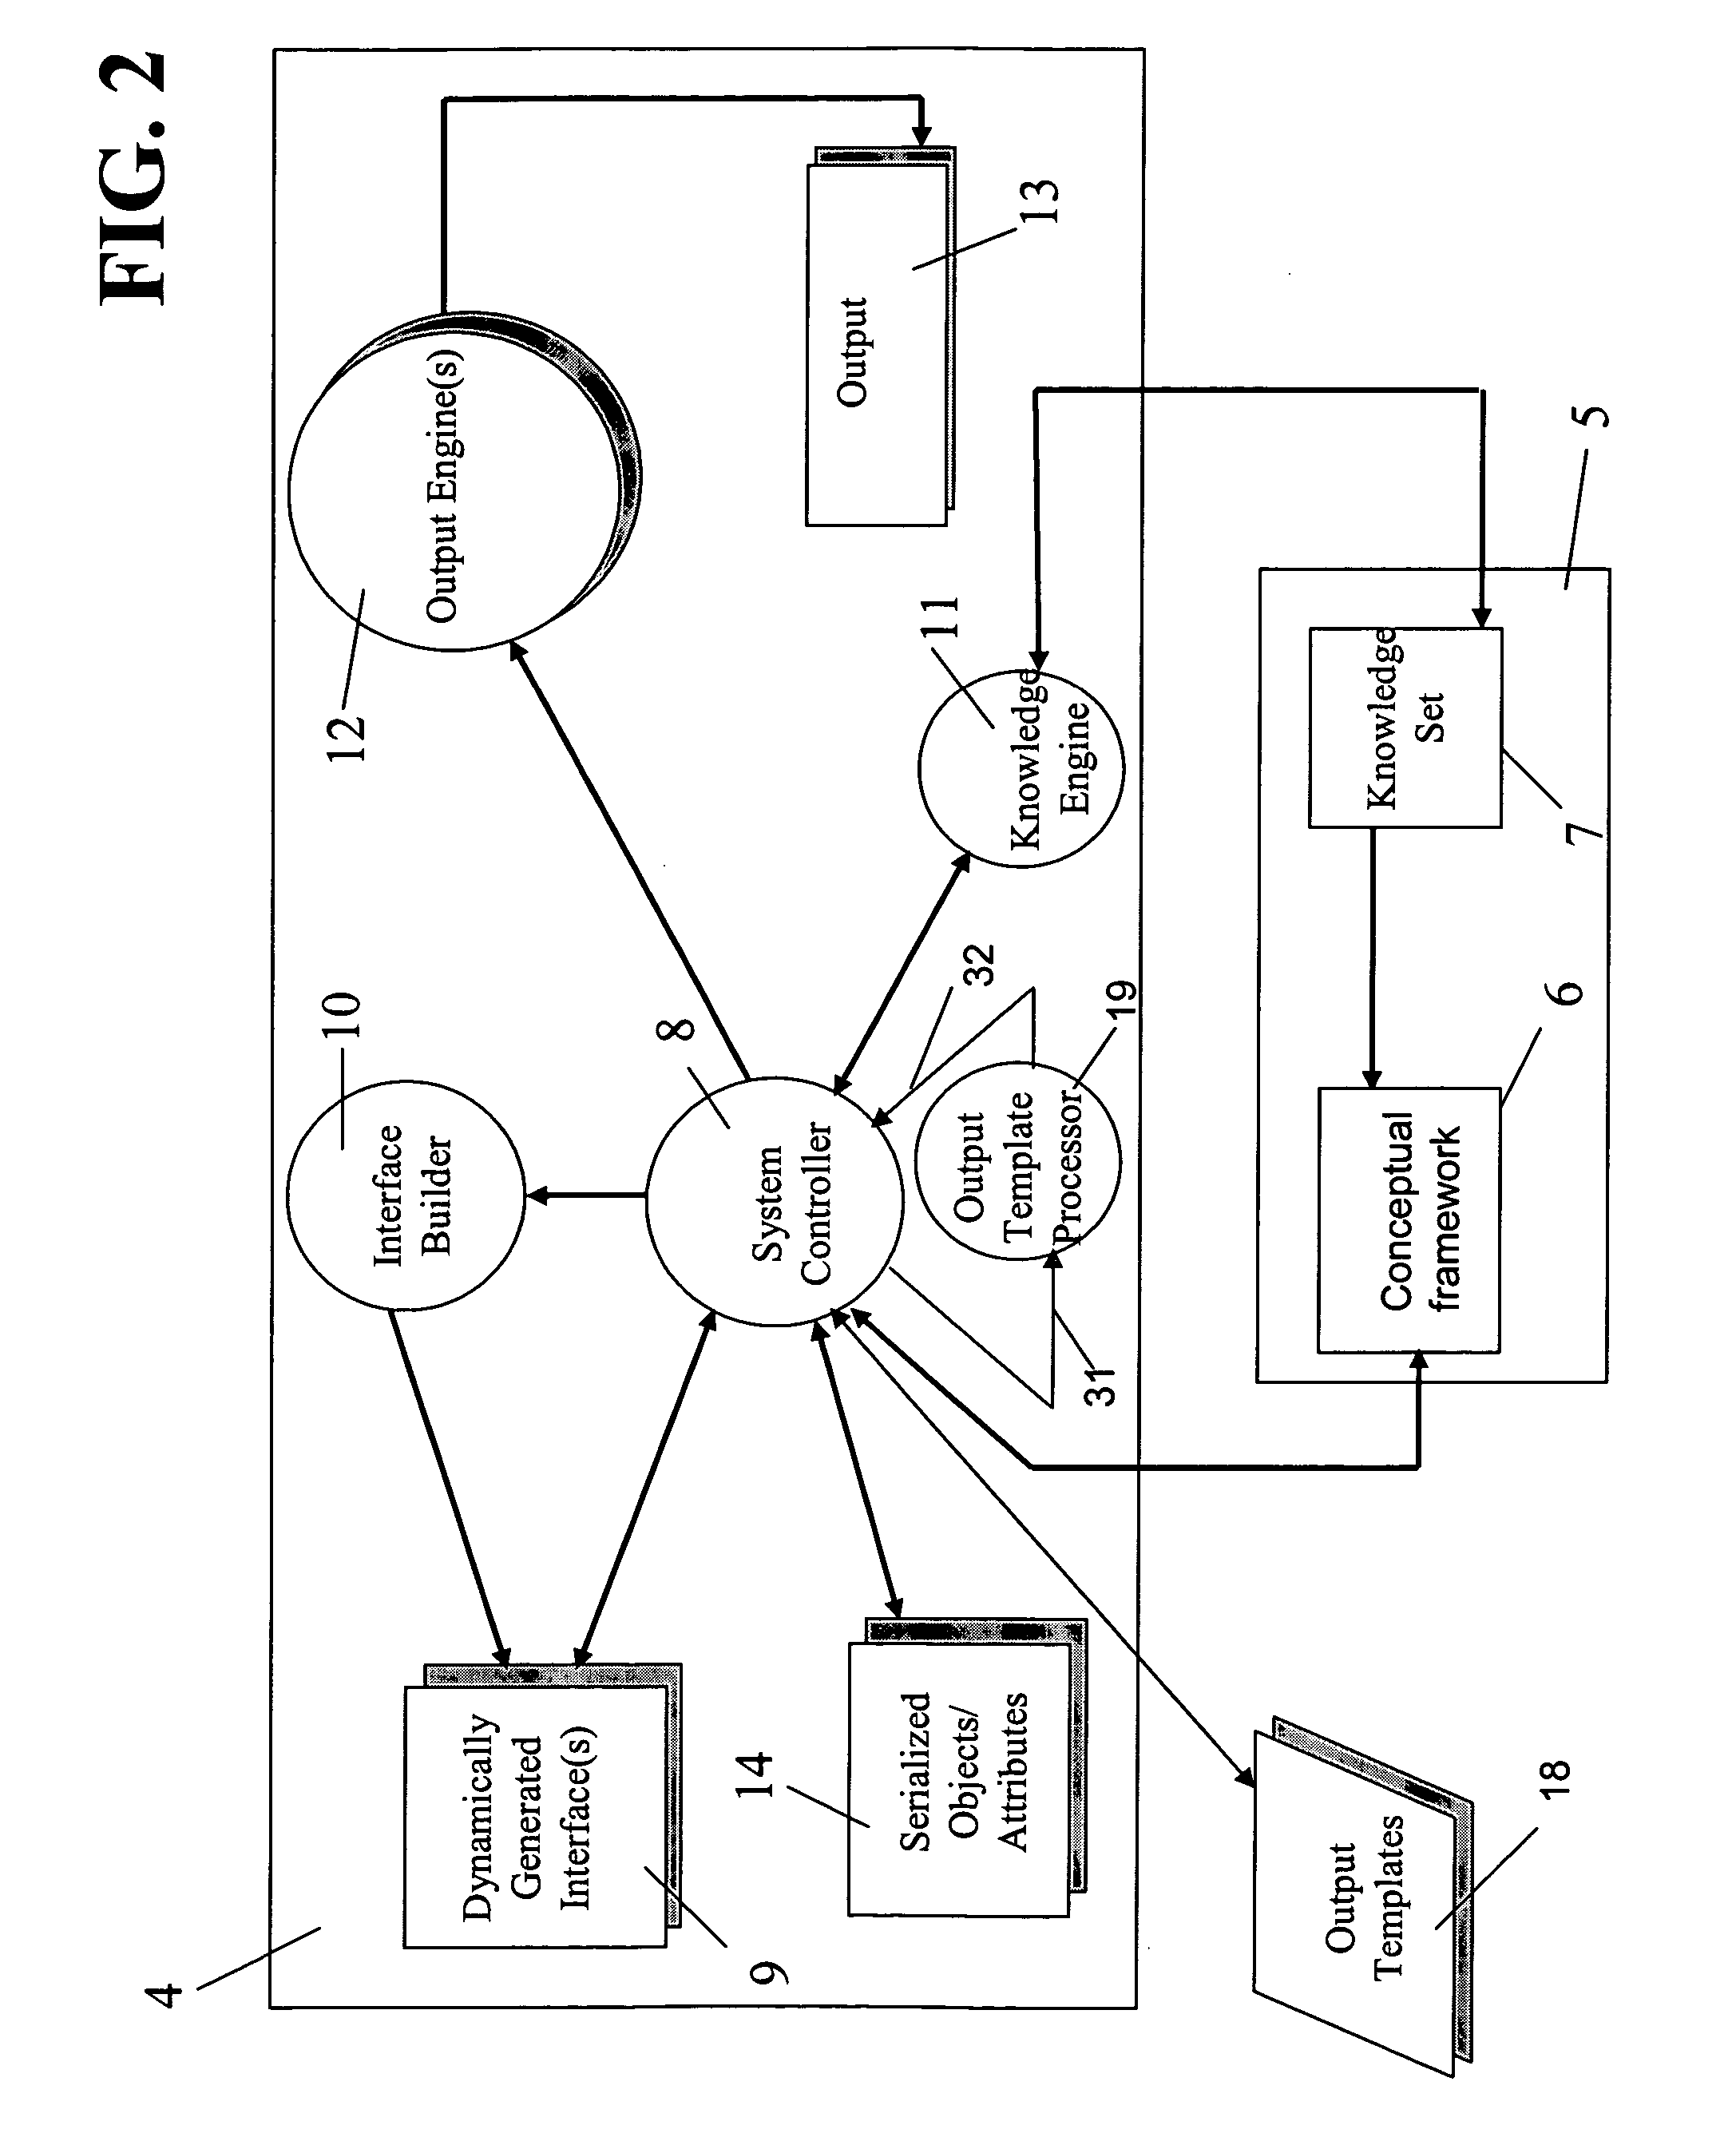 System and method for building and providing a universal product configuration system for arbitrary domains